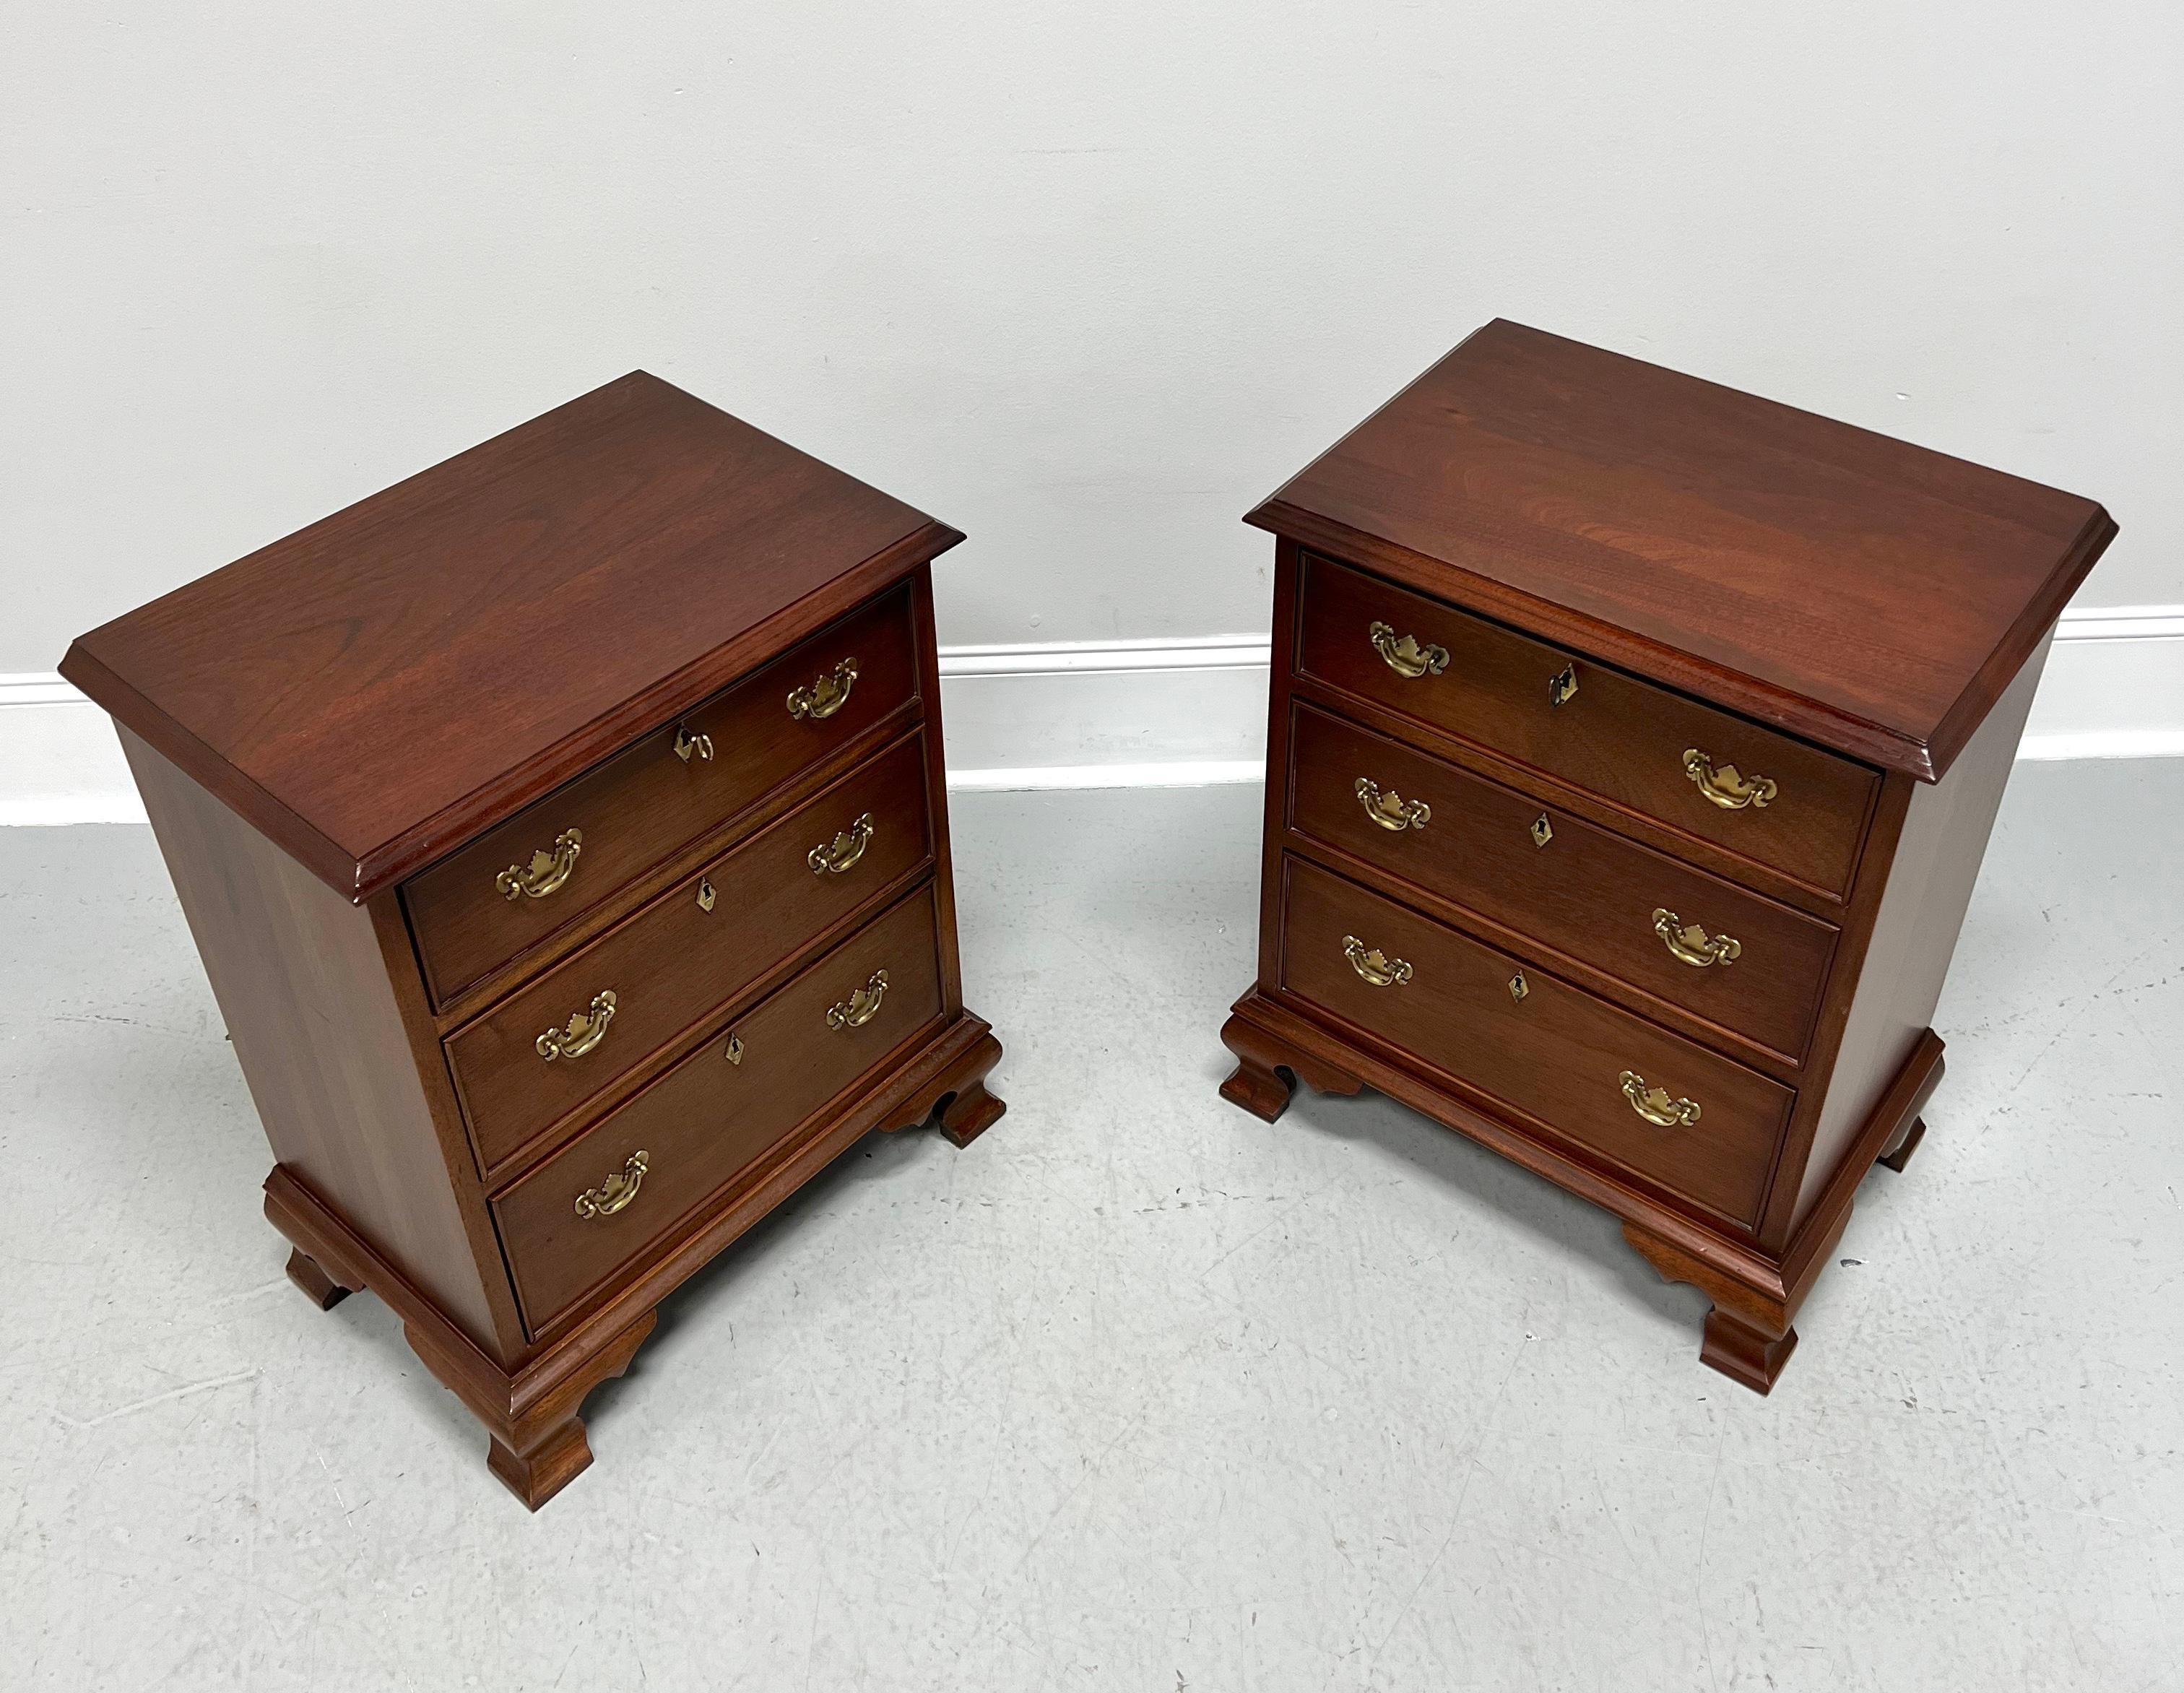 A pair of Chippendale style nightstands by high-quality furniture maker Craftique. Solid mahogany with their Old Wood finish, brass hardware, ogee edge to top, brass keyhole escutcheons, and ogee bracket feet. Features three lockable drawers of